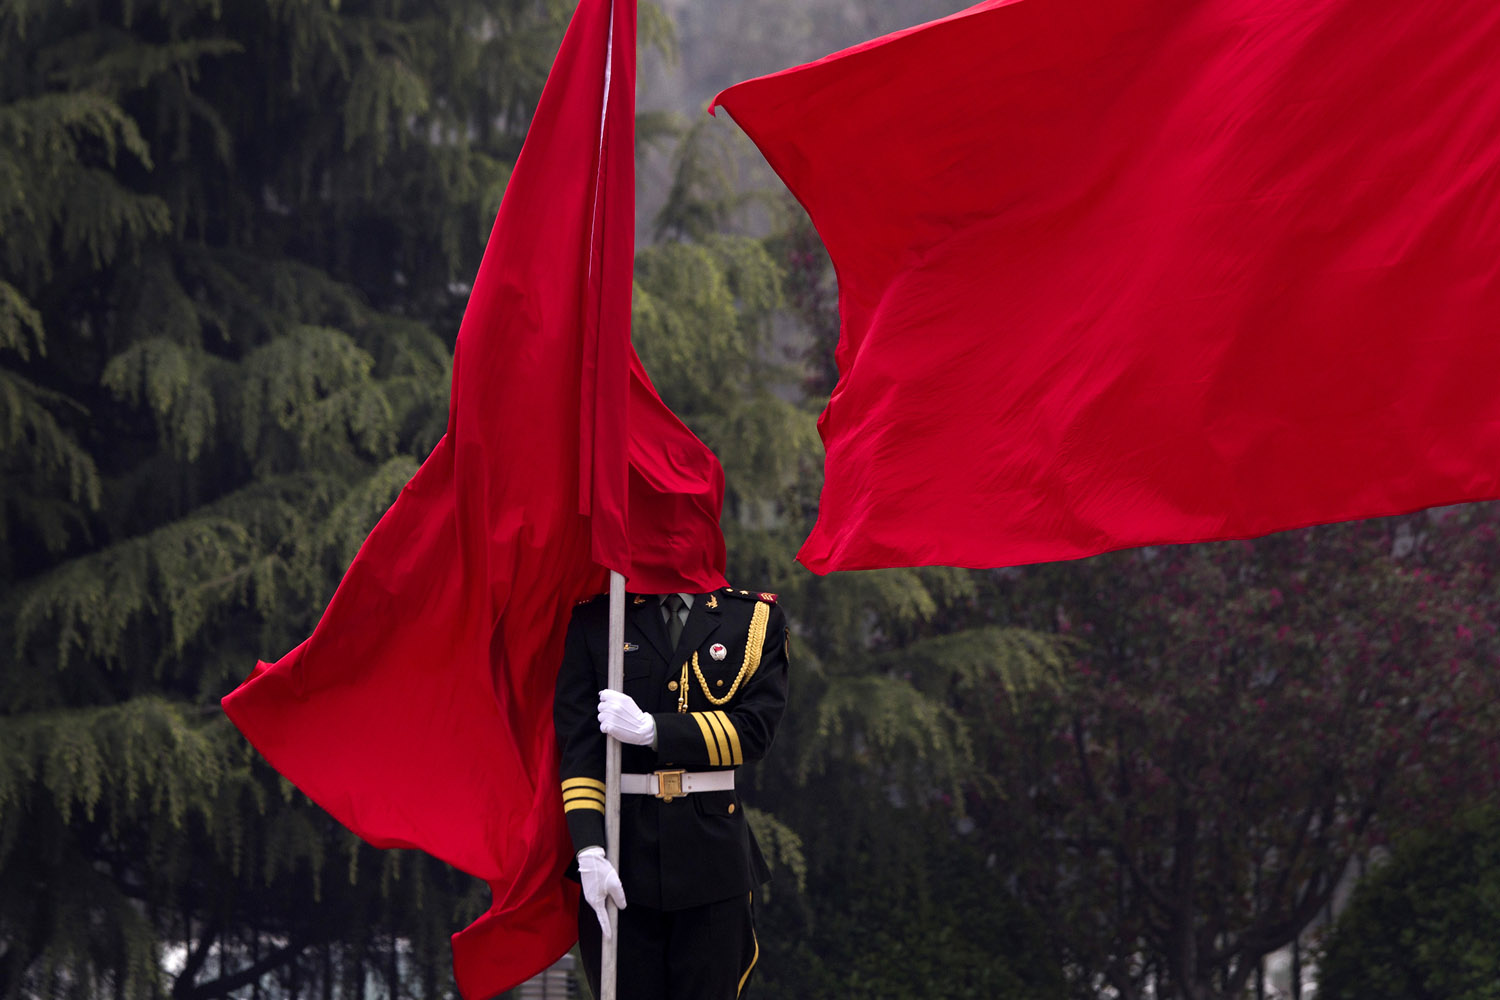 April 22, 2013. A honor guard is covered by a flag during a welcoming ceremony for U.S. Joint Chiefs Chairman Gen. Martin Dempsey at the Bayi Building in Beijing.